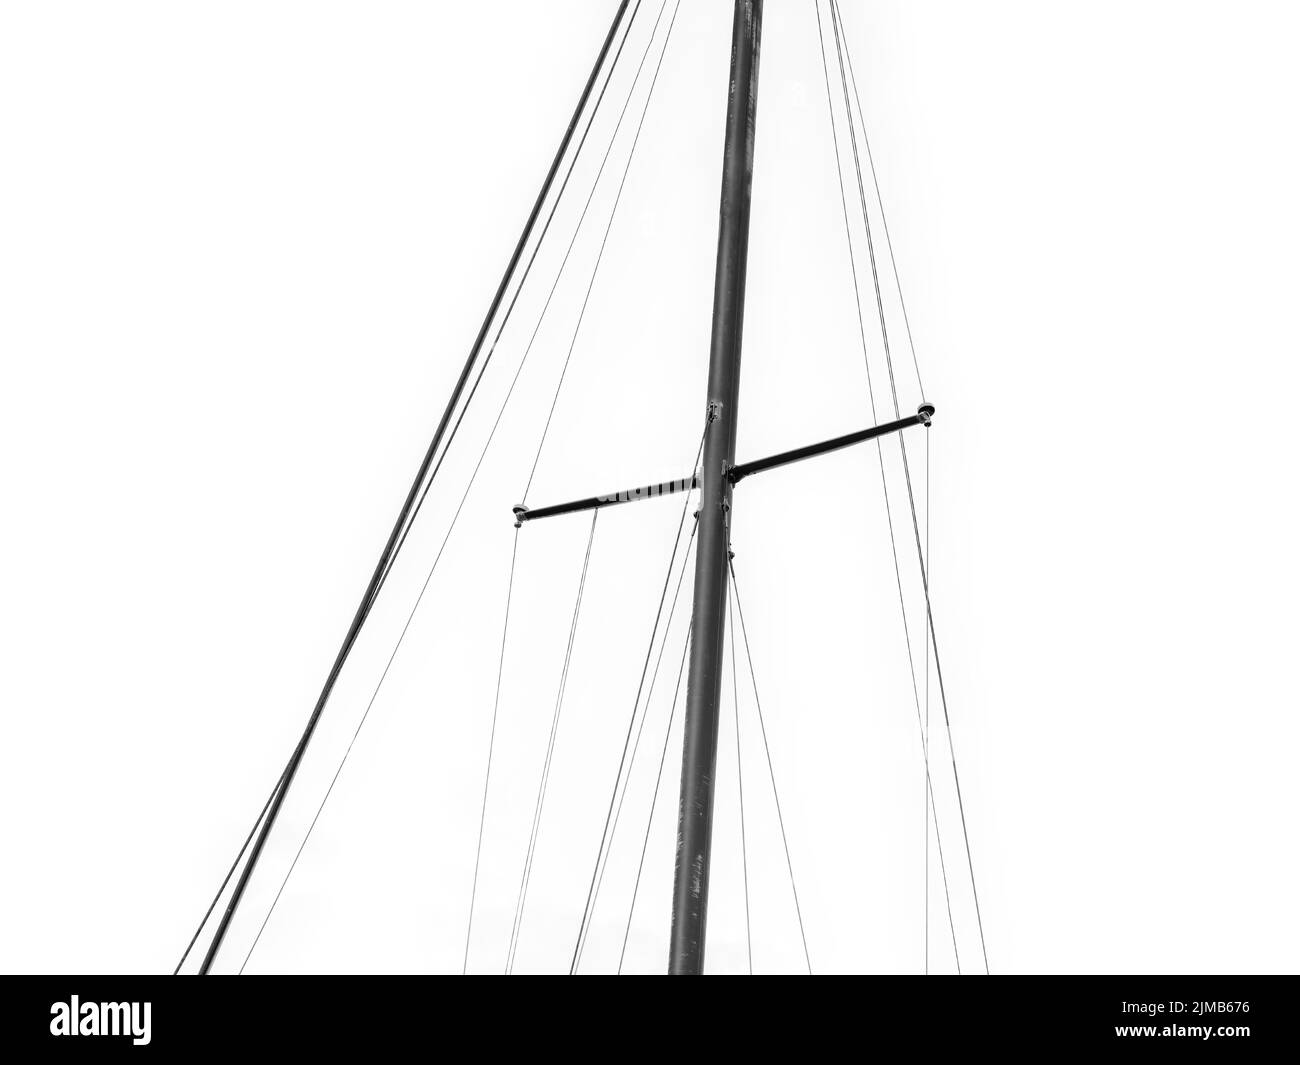 View of yacht mast with ropes, isolated on white background Stock Photo